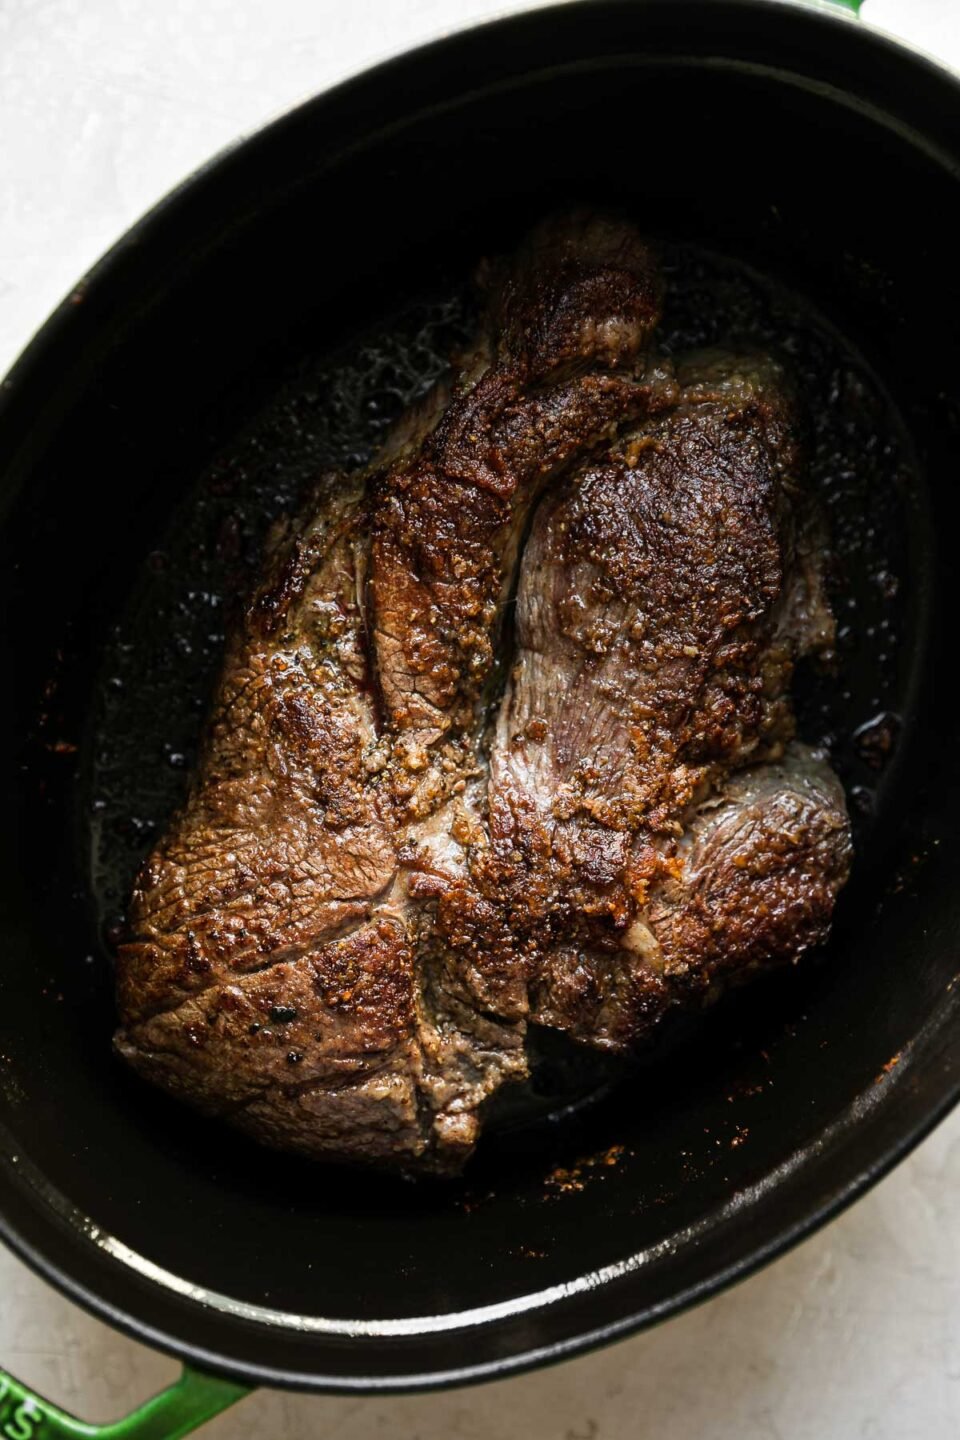 How to make braised pot roast, Step 2: Brown the chuck roast. Browned chuck roasts rests at the bottom of an oval green Staub dutch oven. The dutch oven sits atop a creamy white textured surface.